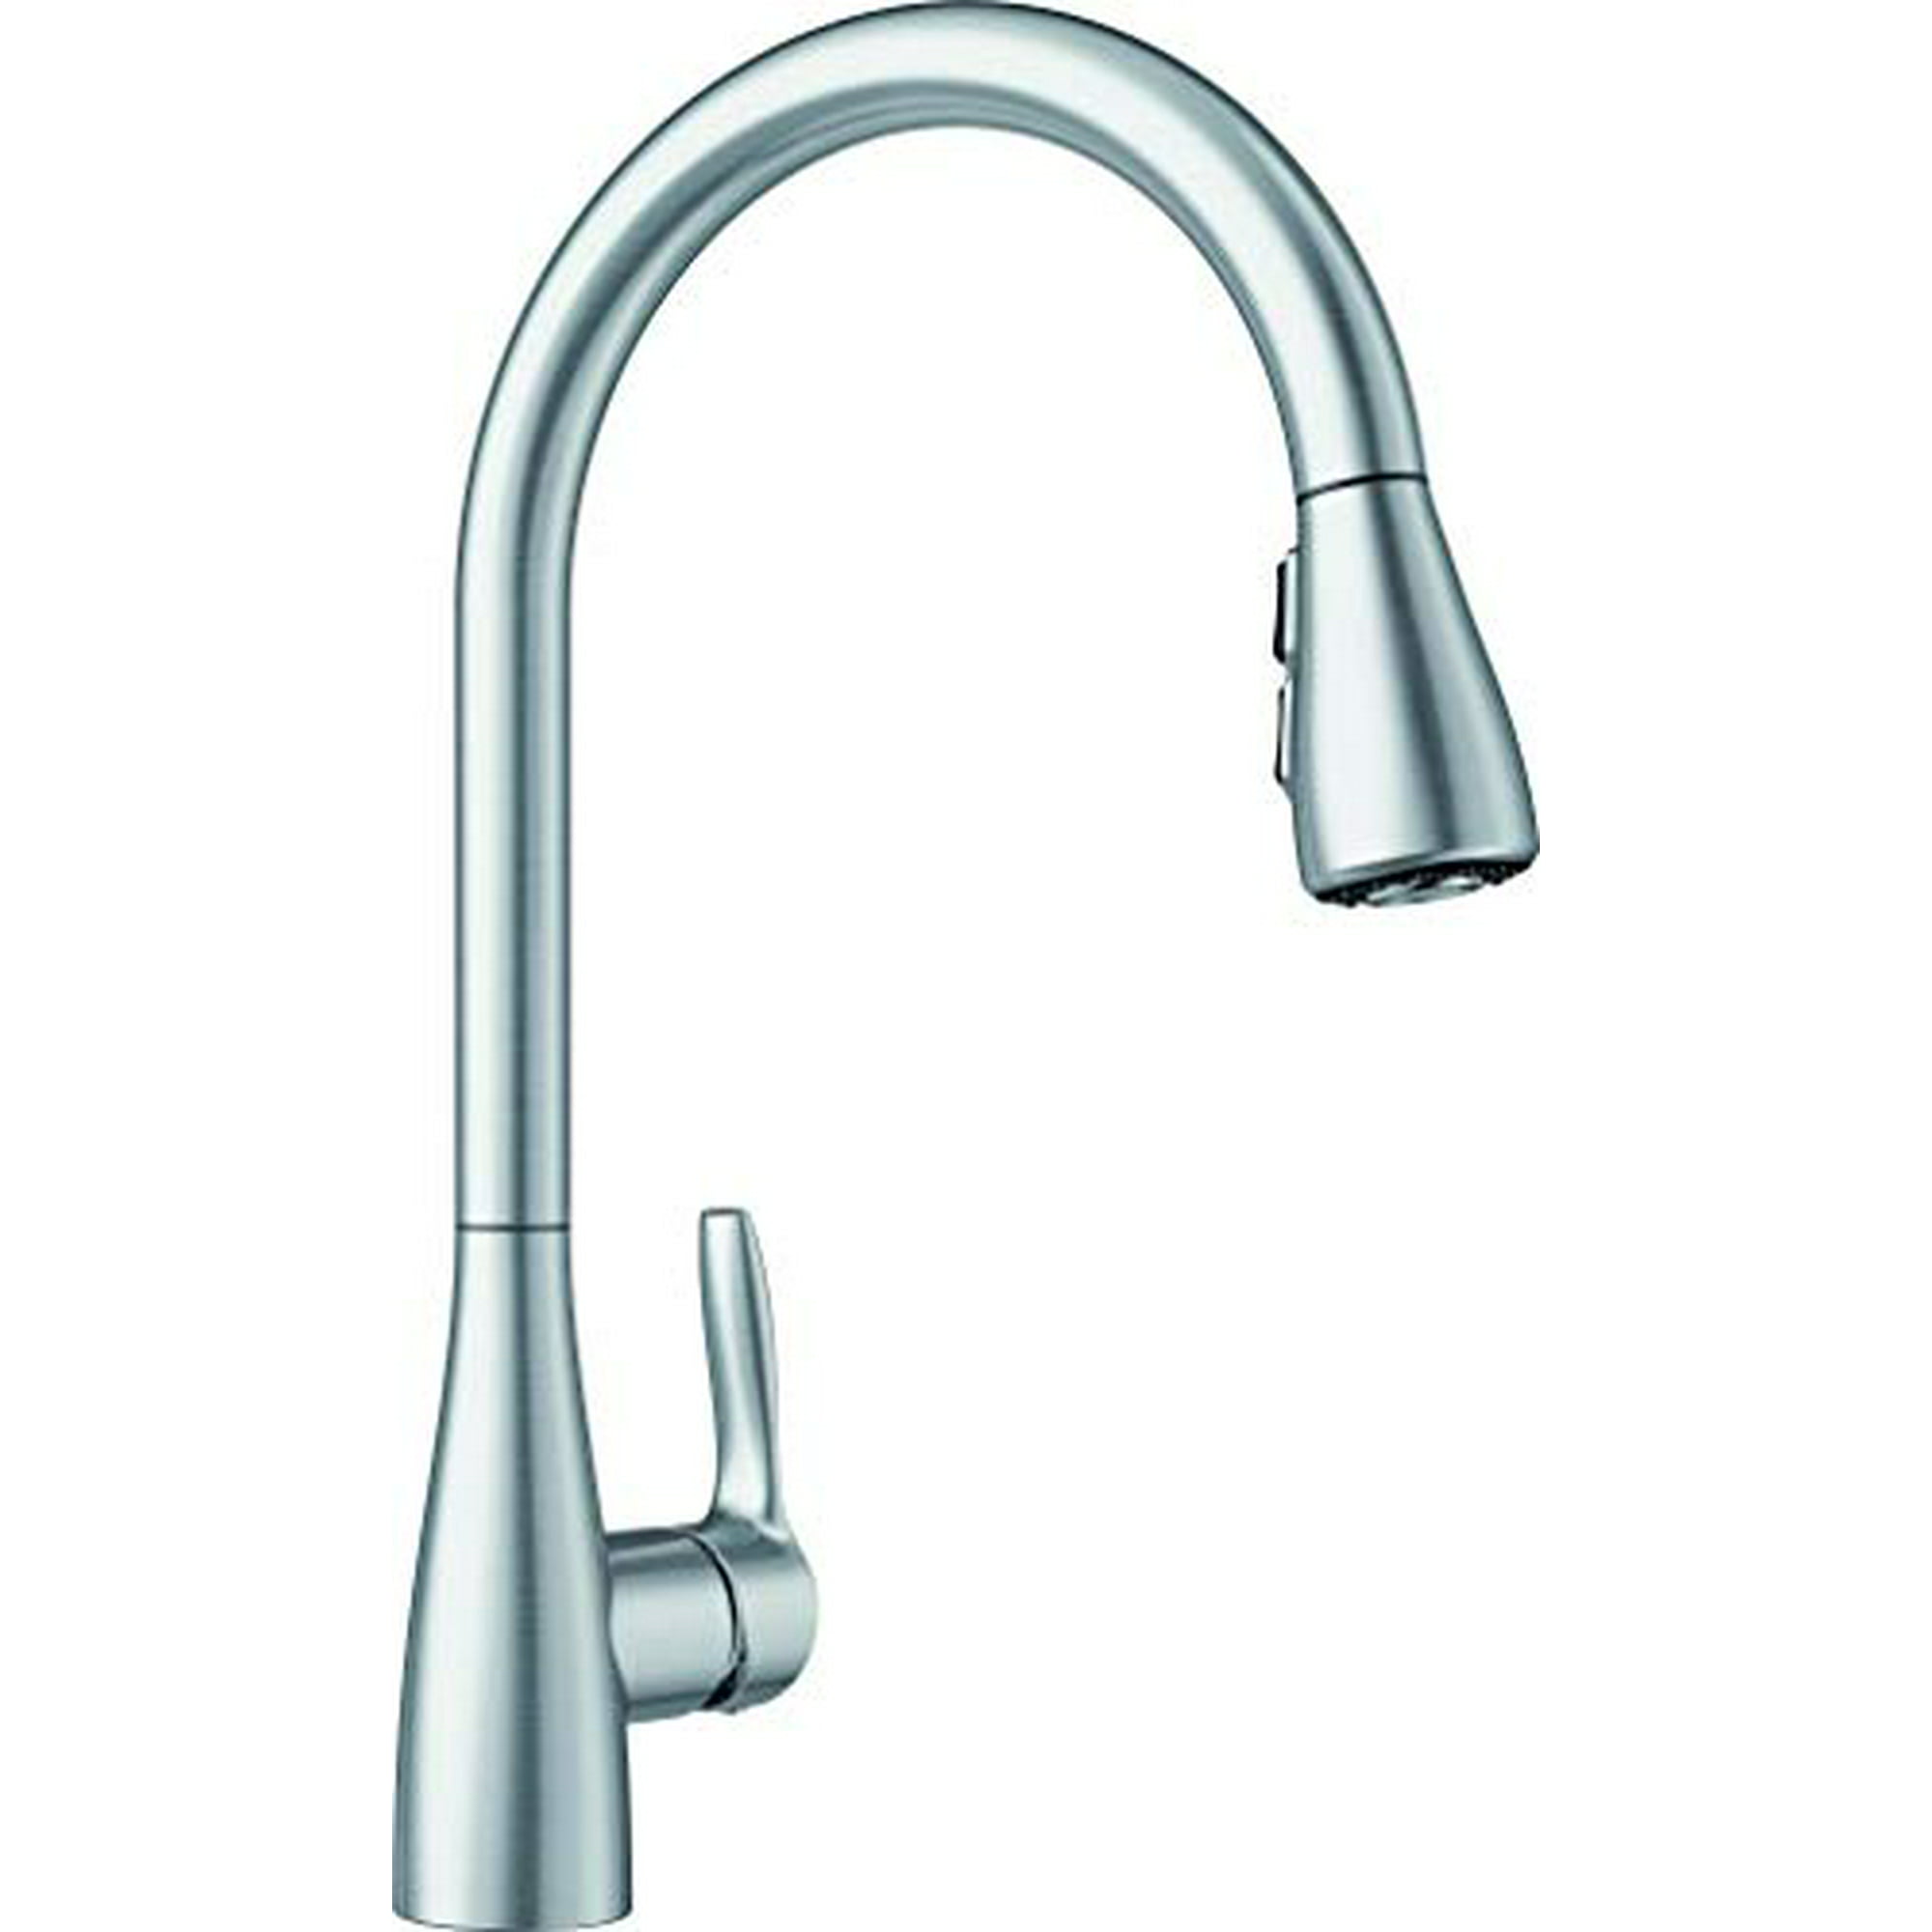 Blanco Artura 442208 Atura 15 Gpm Kitchen Faucet With Pulldown Spray In Stainless Steel Walmart Canada